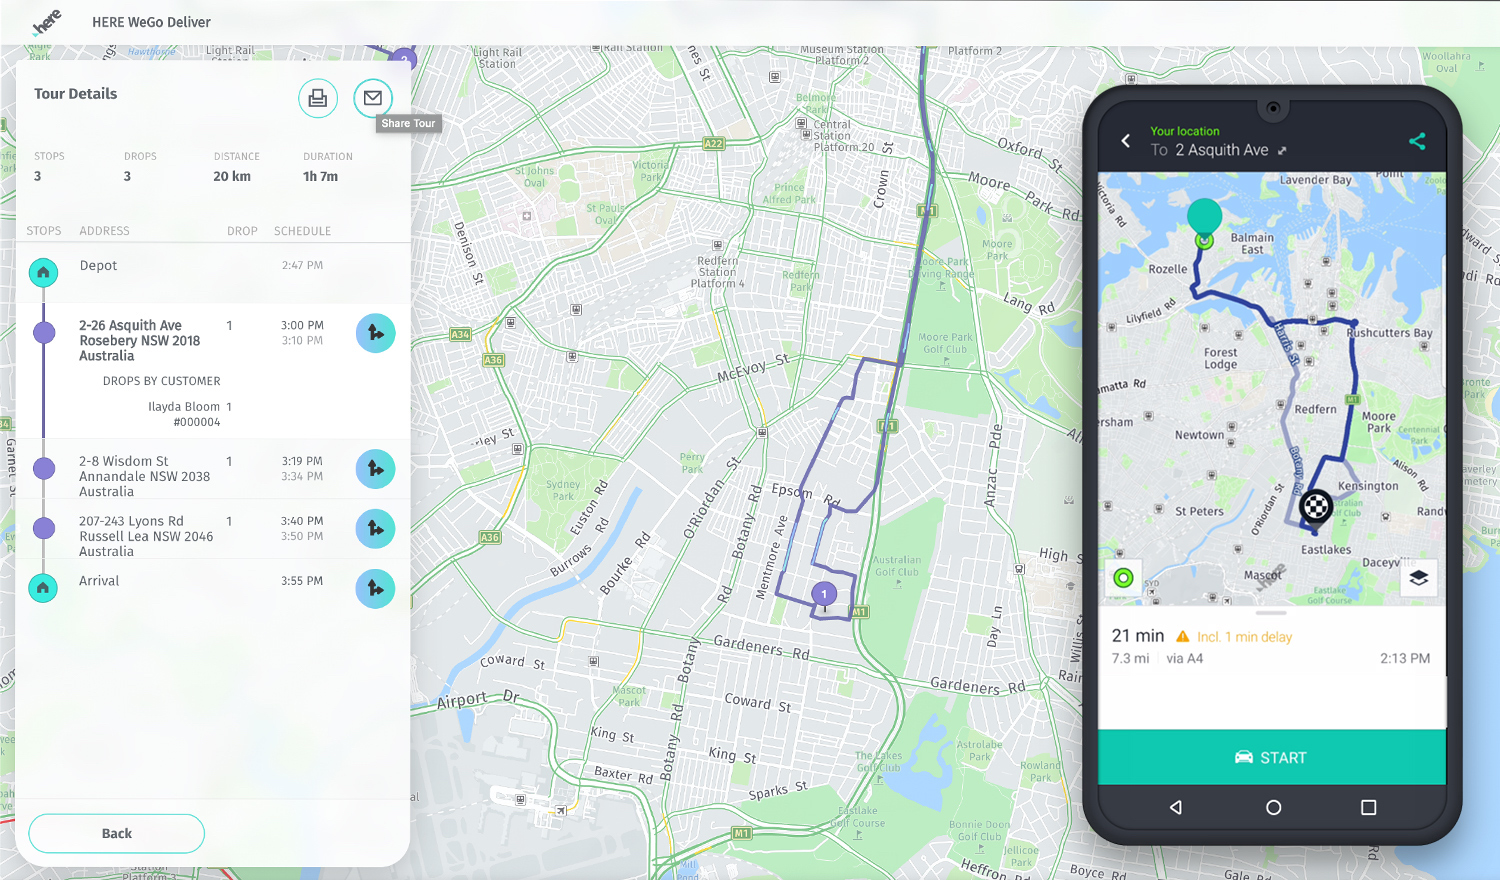 HERE WeGo Deliver - Delivery Route Planning App